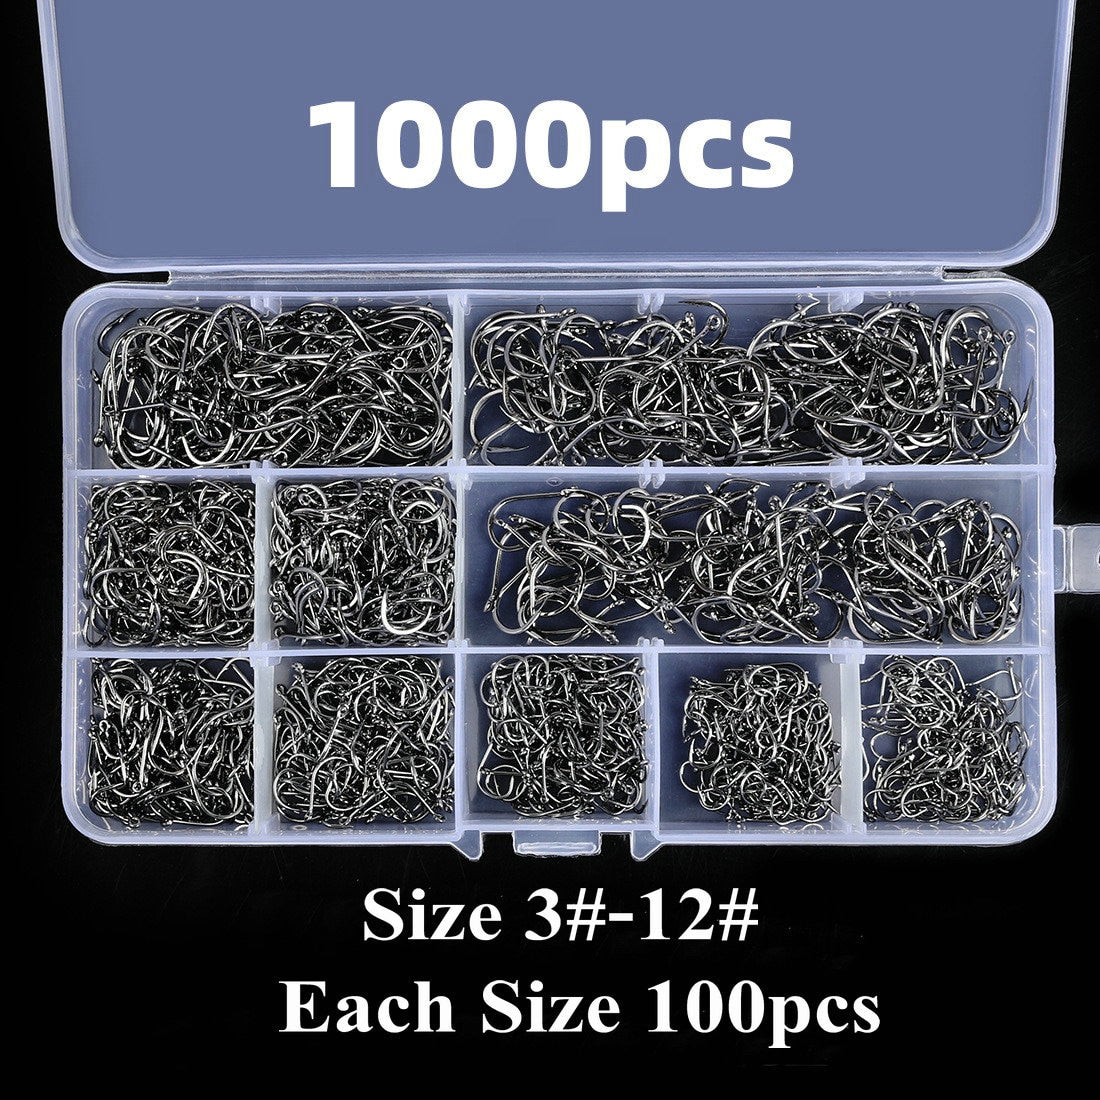 ZEAVAN 1000Pcs Number 3-12 Fishing J Hook Different Specifications  Accessories Sharp Fishing Jig Hooks for Fishing Enthusiast 